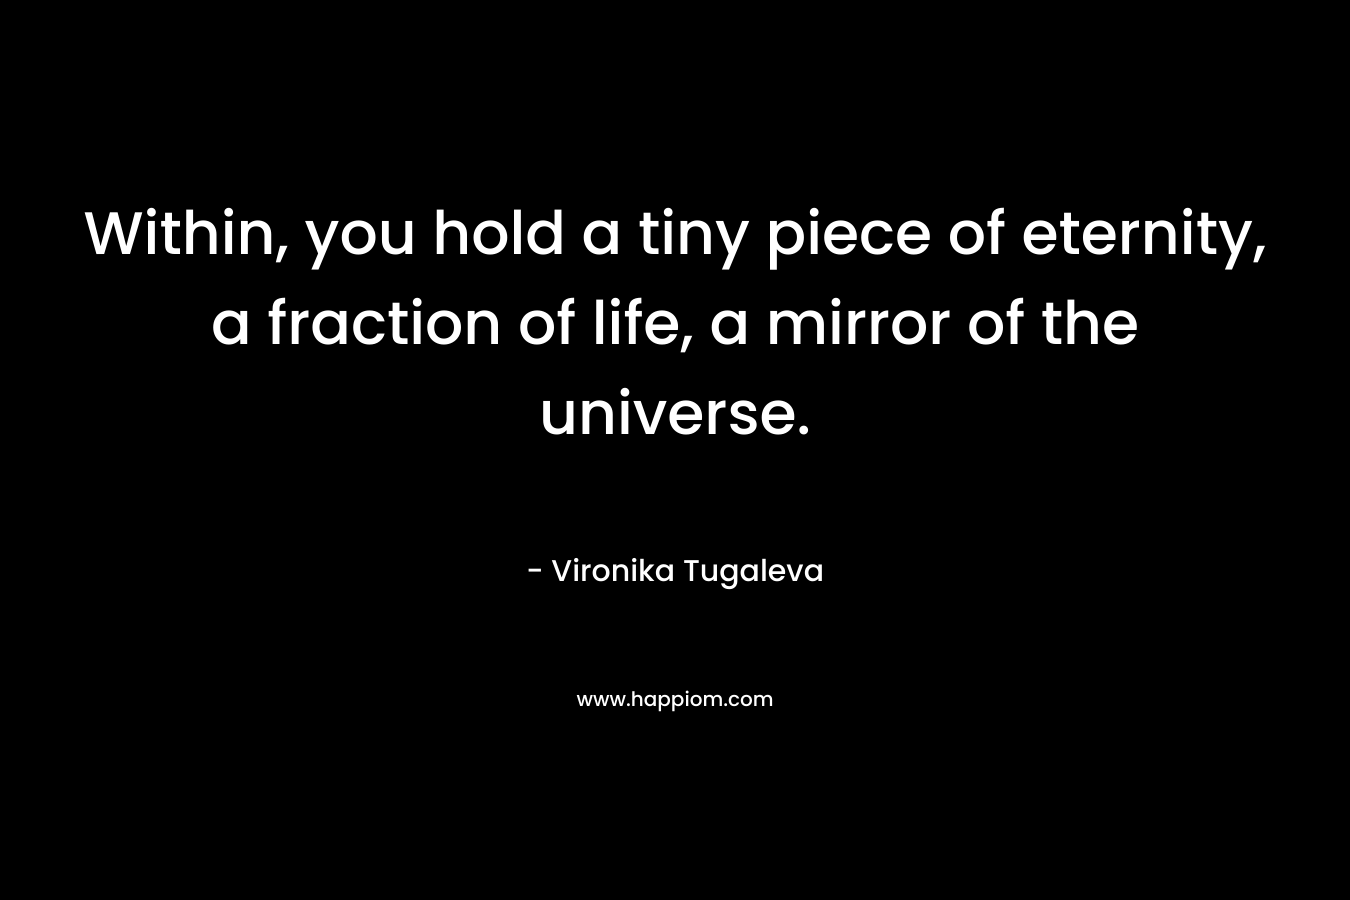 Within, you hold a tiny piece of eternity, a fraction of life, a mirror of the universe. – Vironika Tugaleva